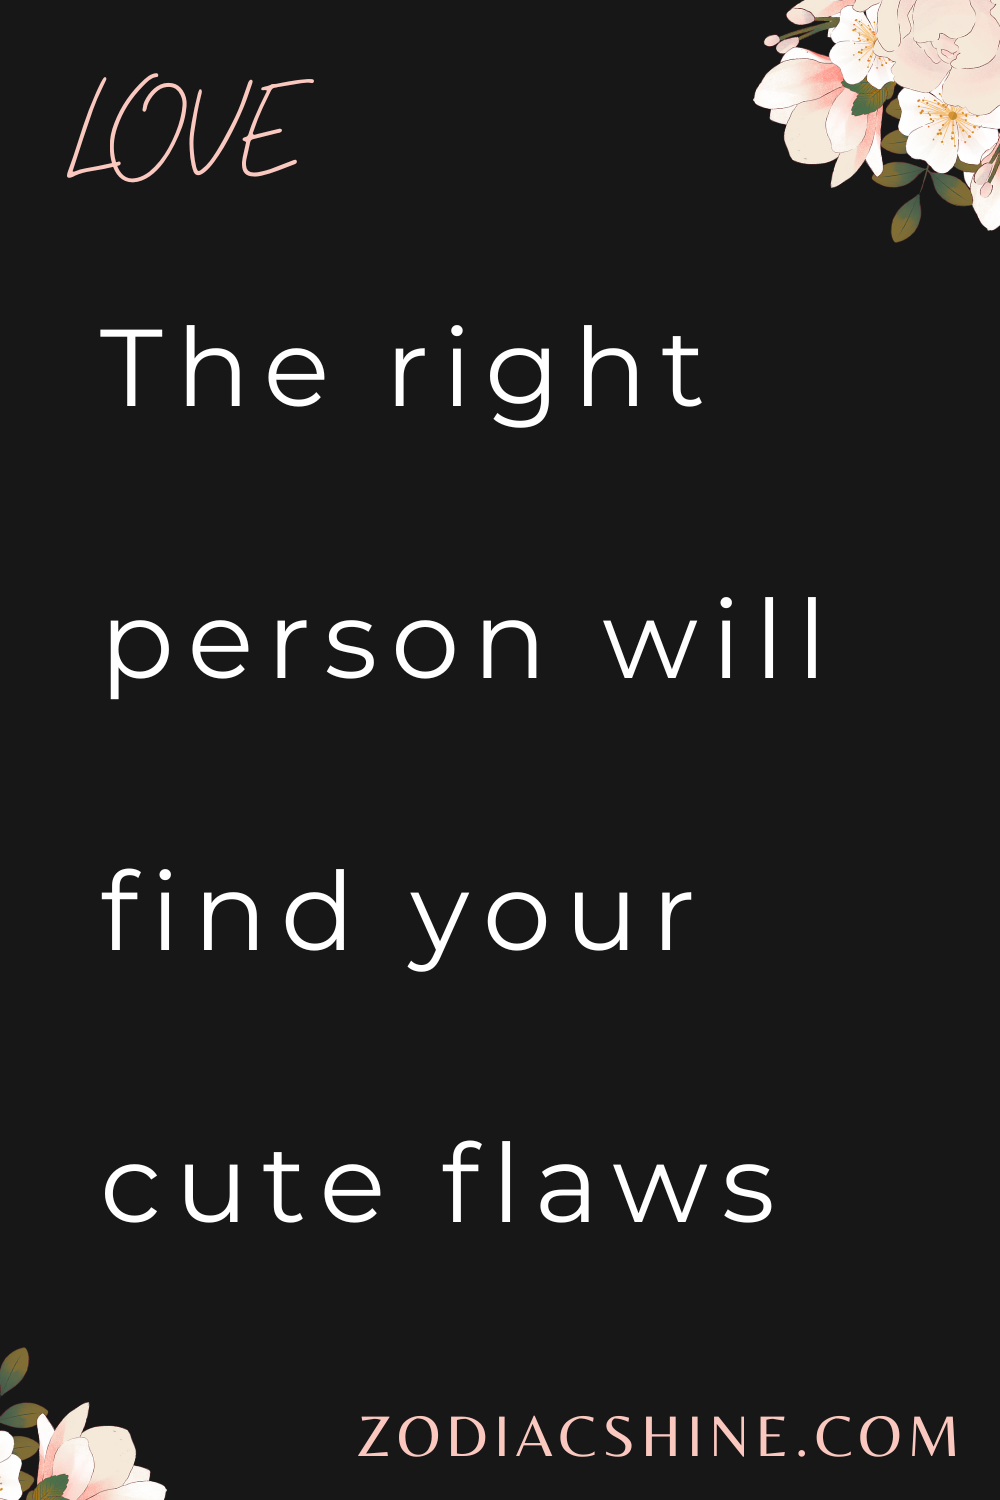 The right person will find your cute flaws